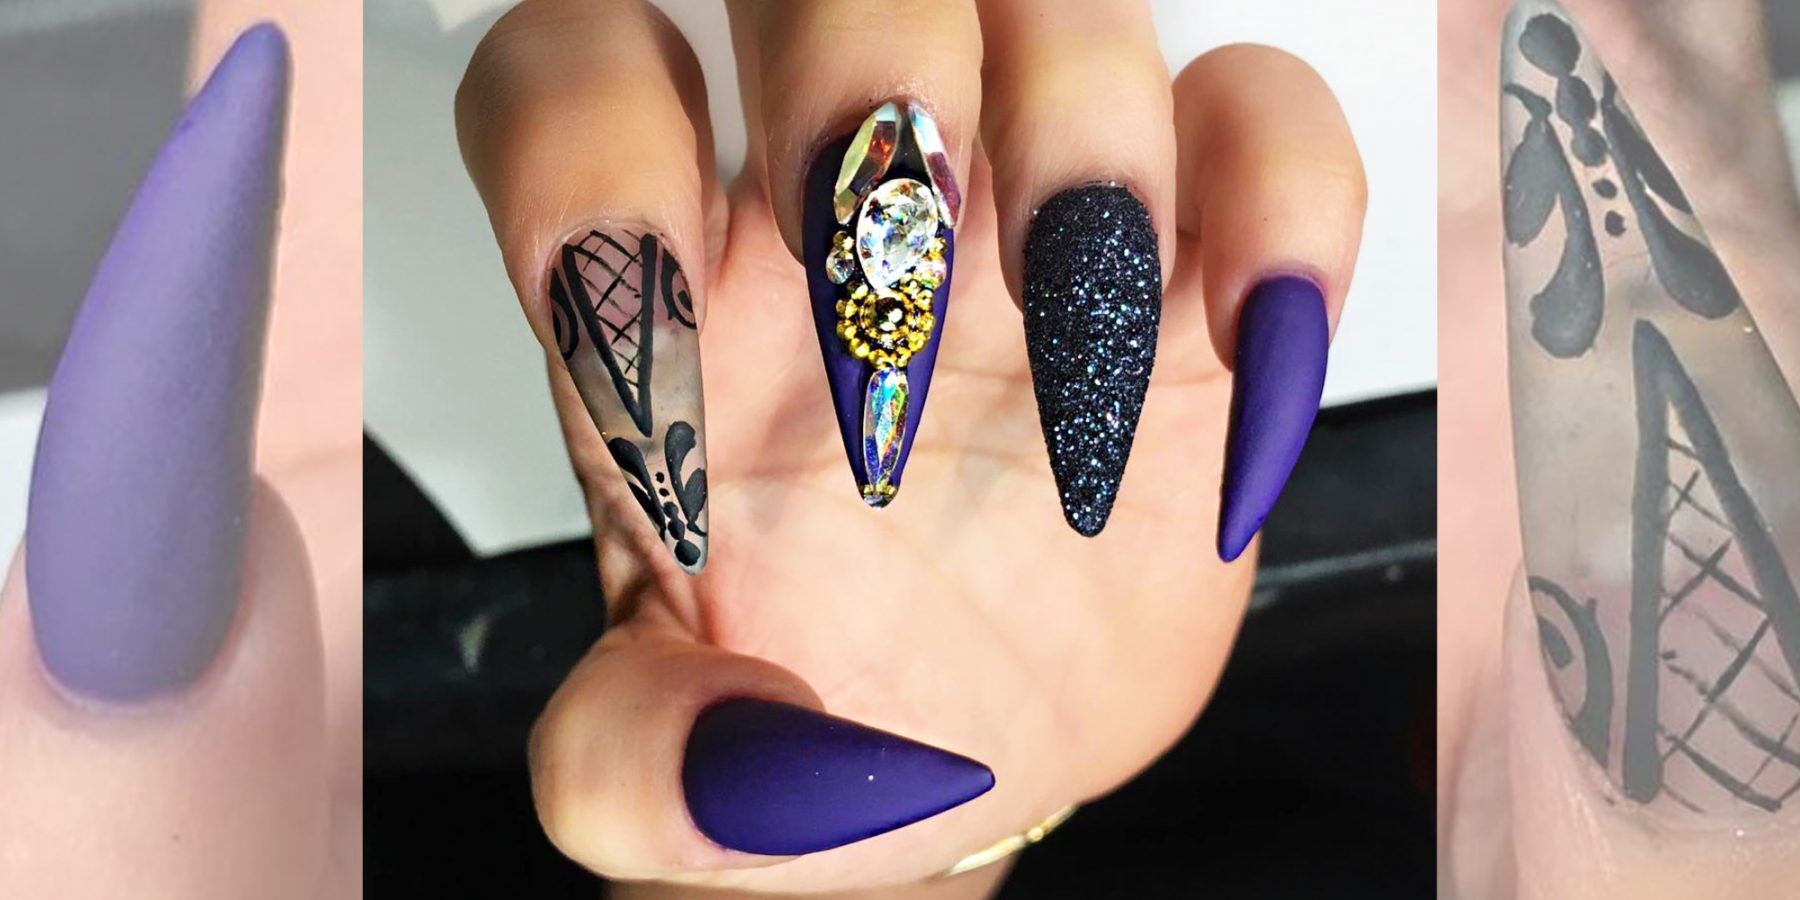 10 Instagram Nail Influencers to Follow